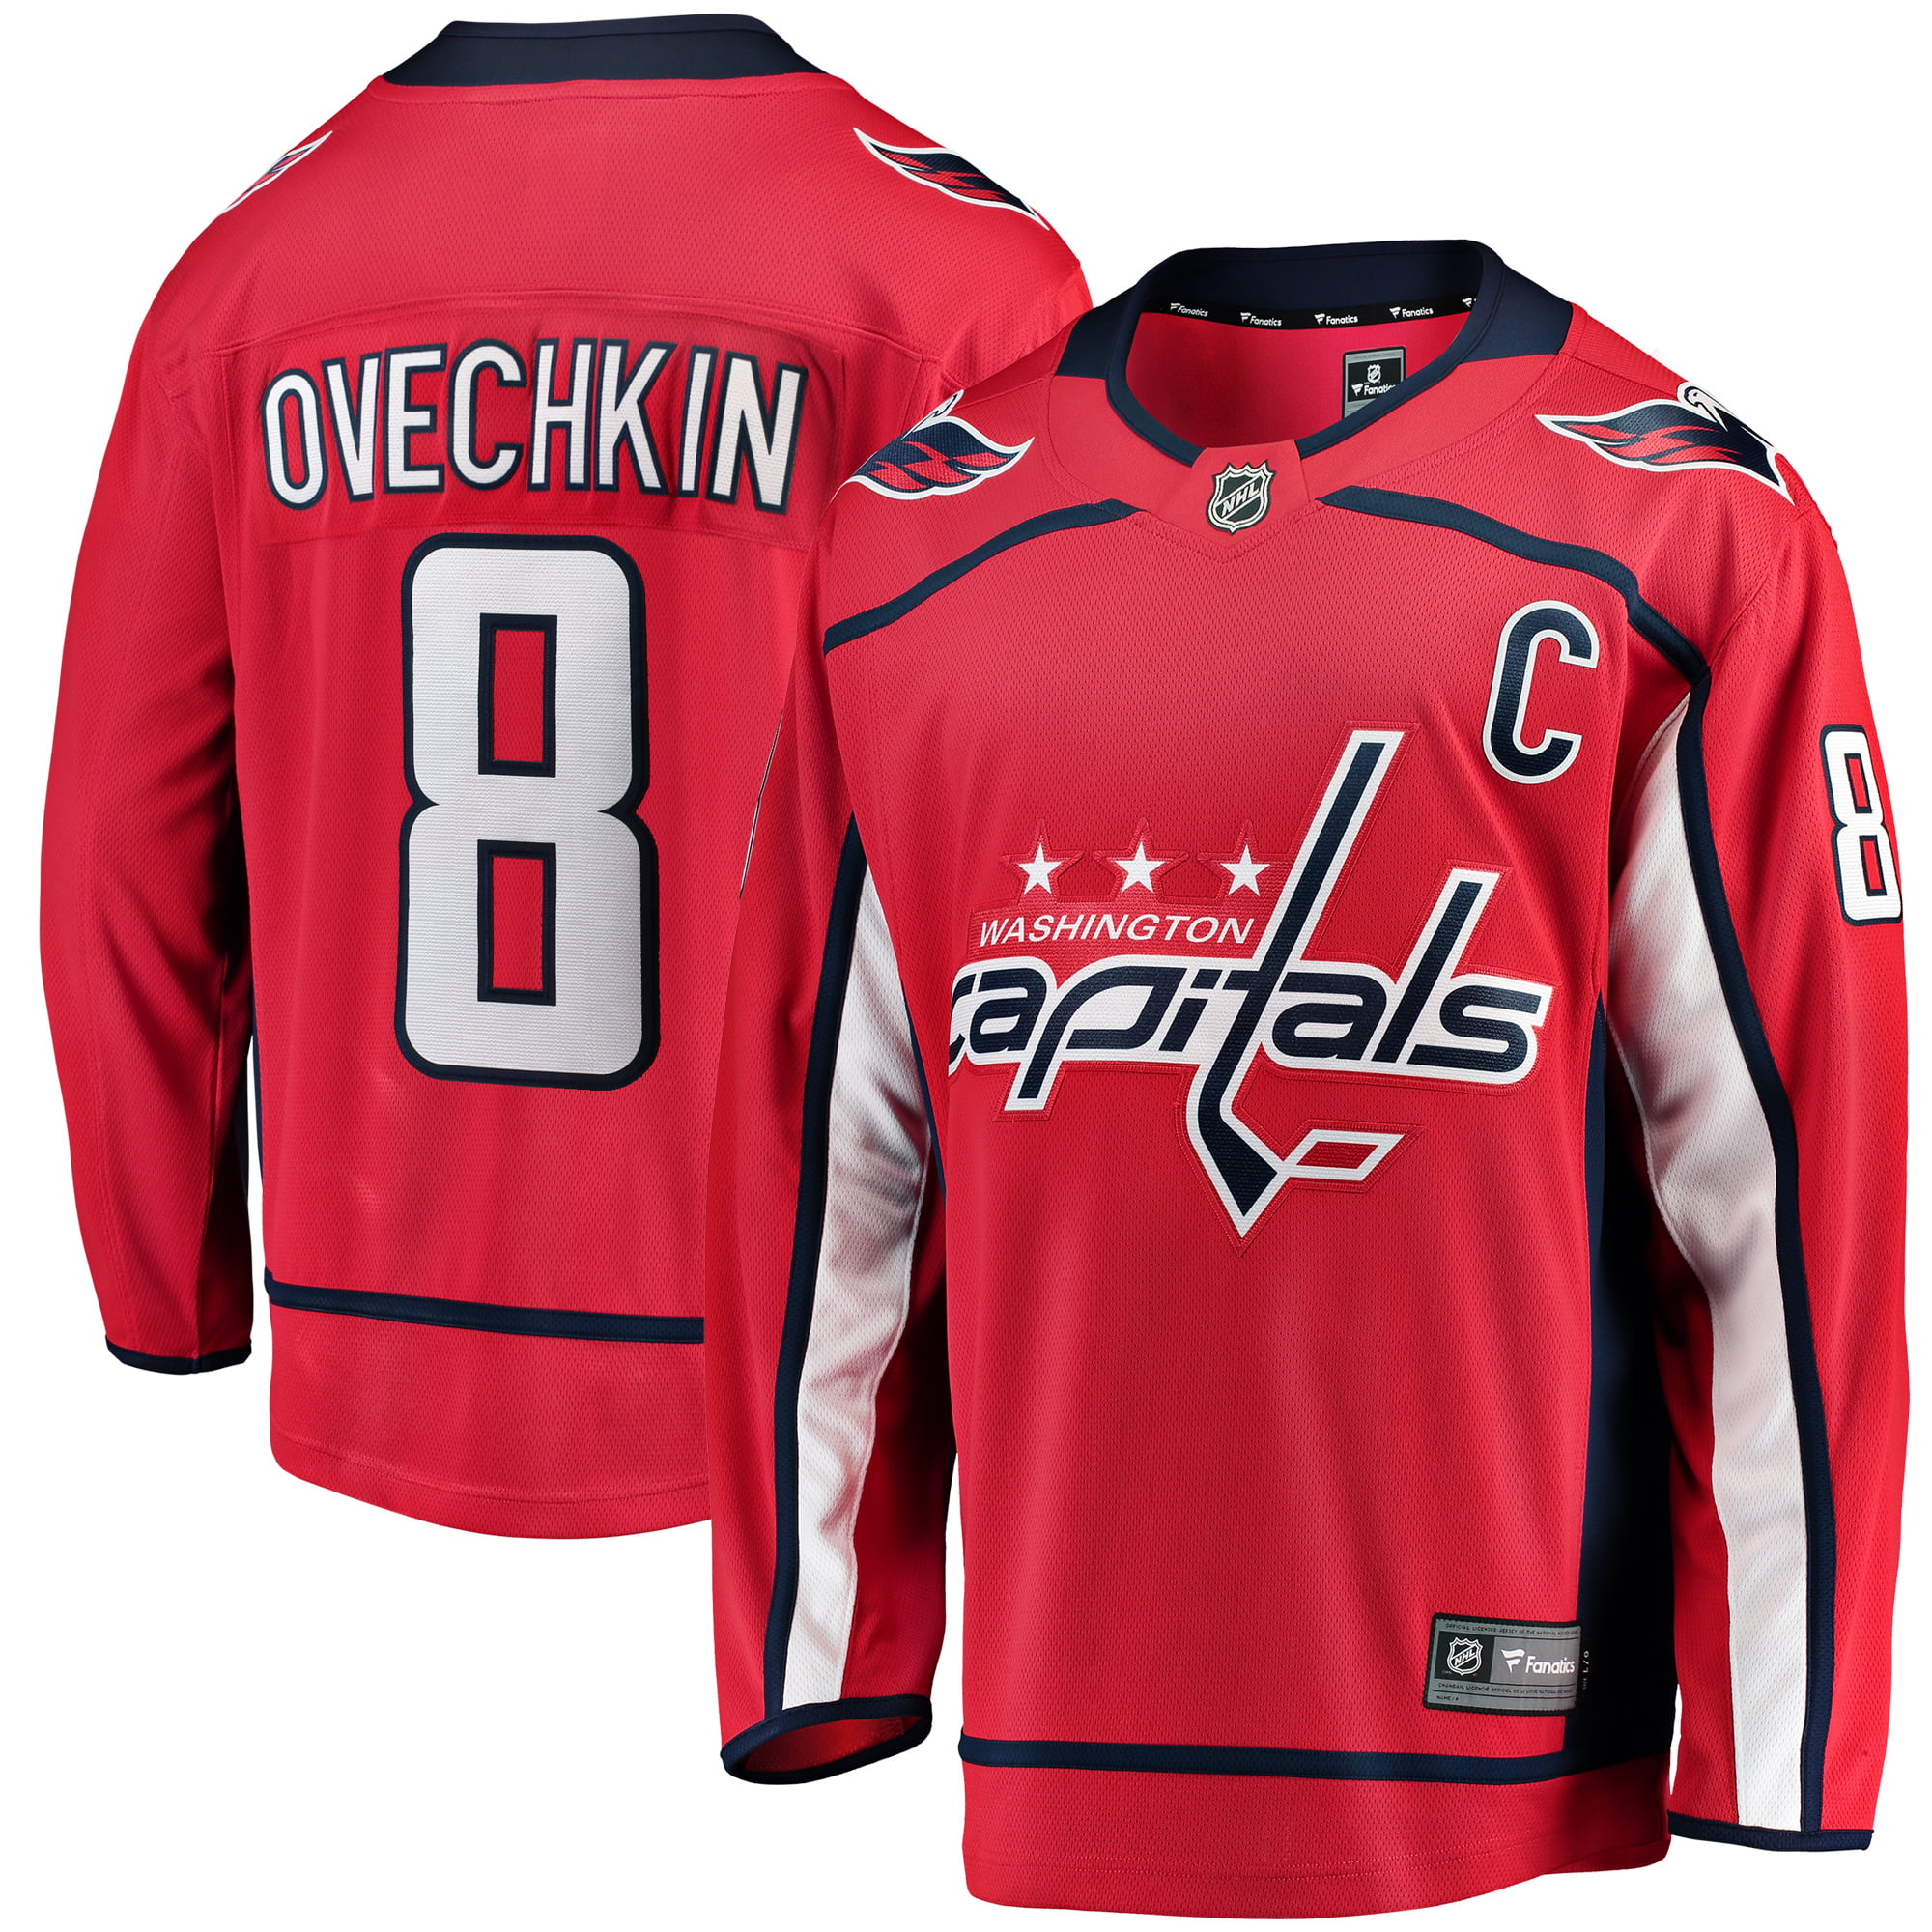 old caps jersey